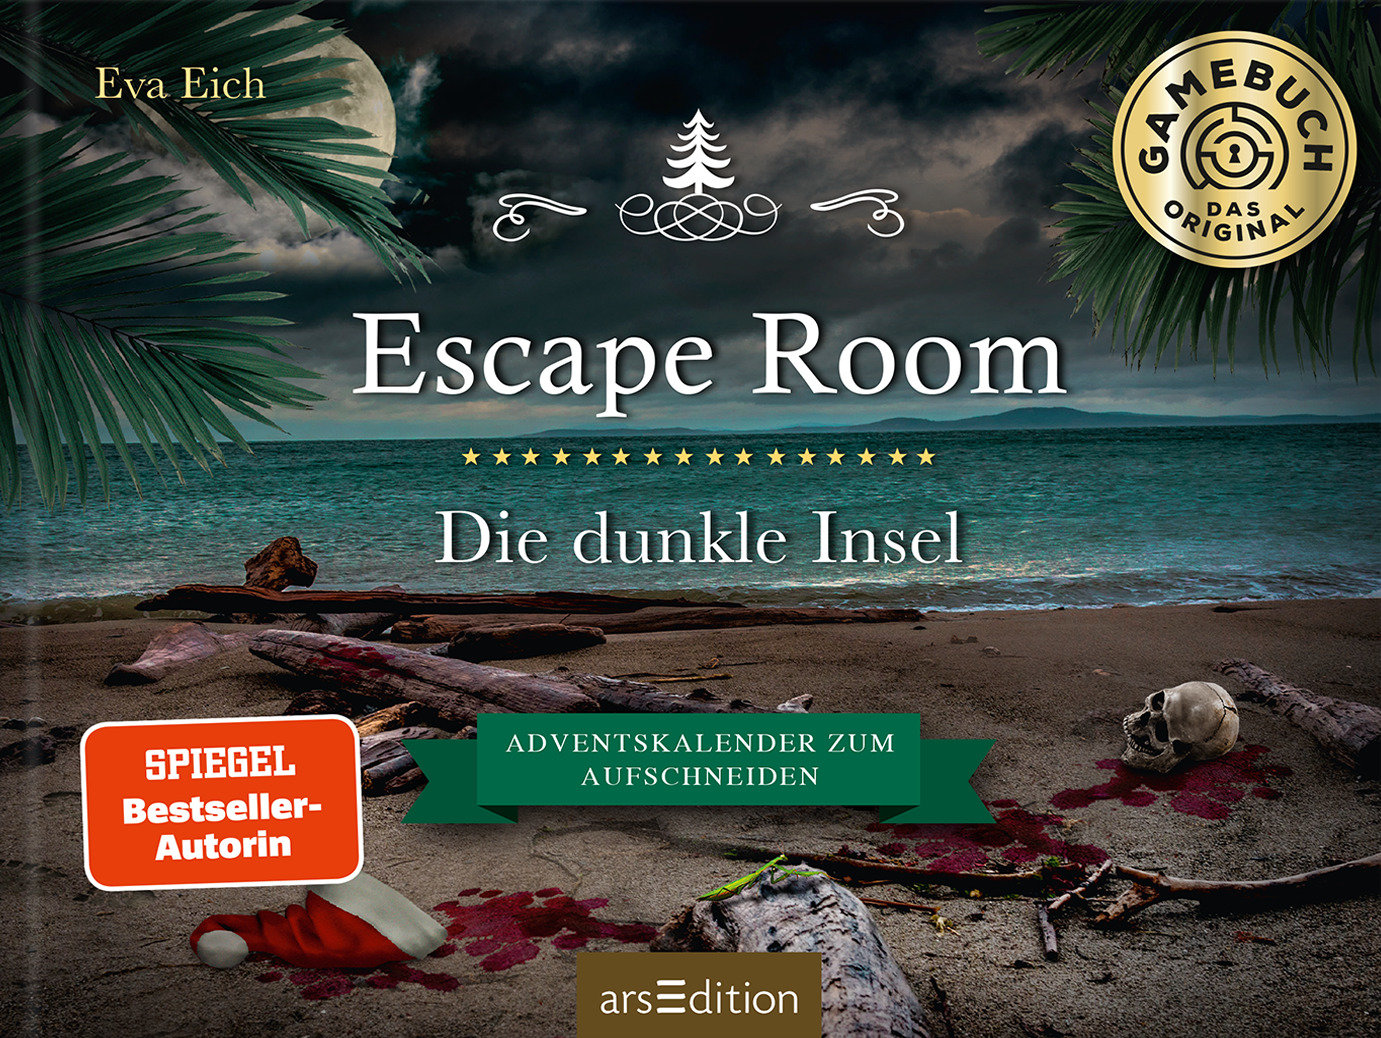 Buchcover "Escape Room: Die dunkle Insel", arsEdition